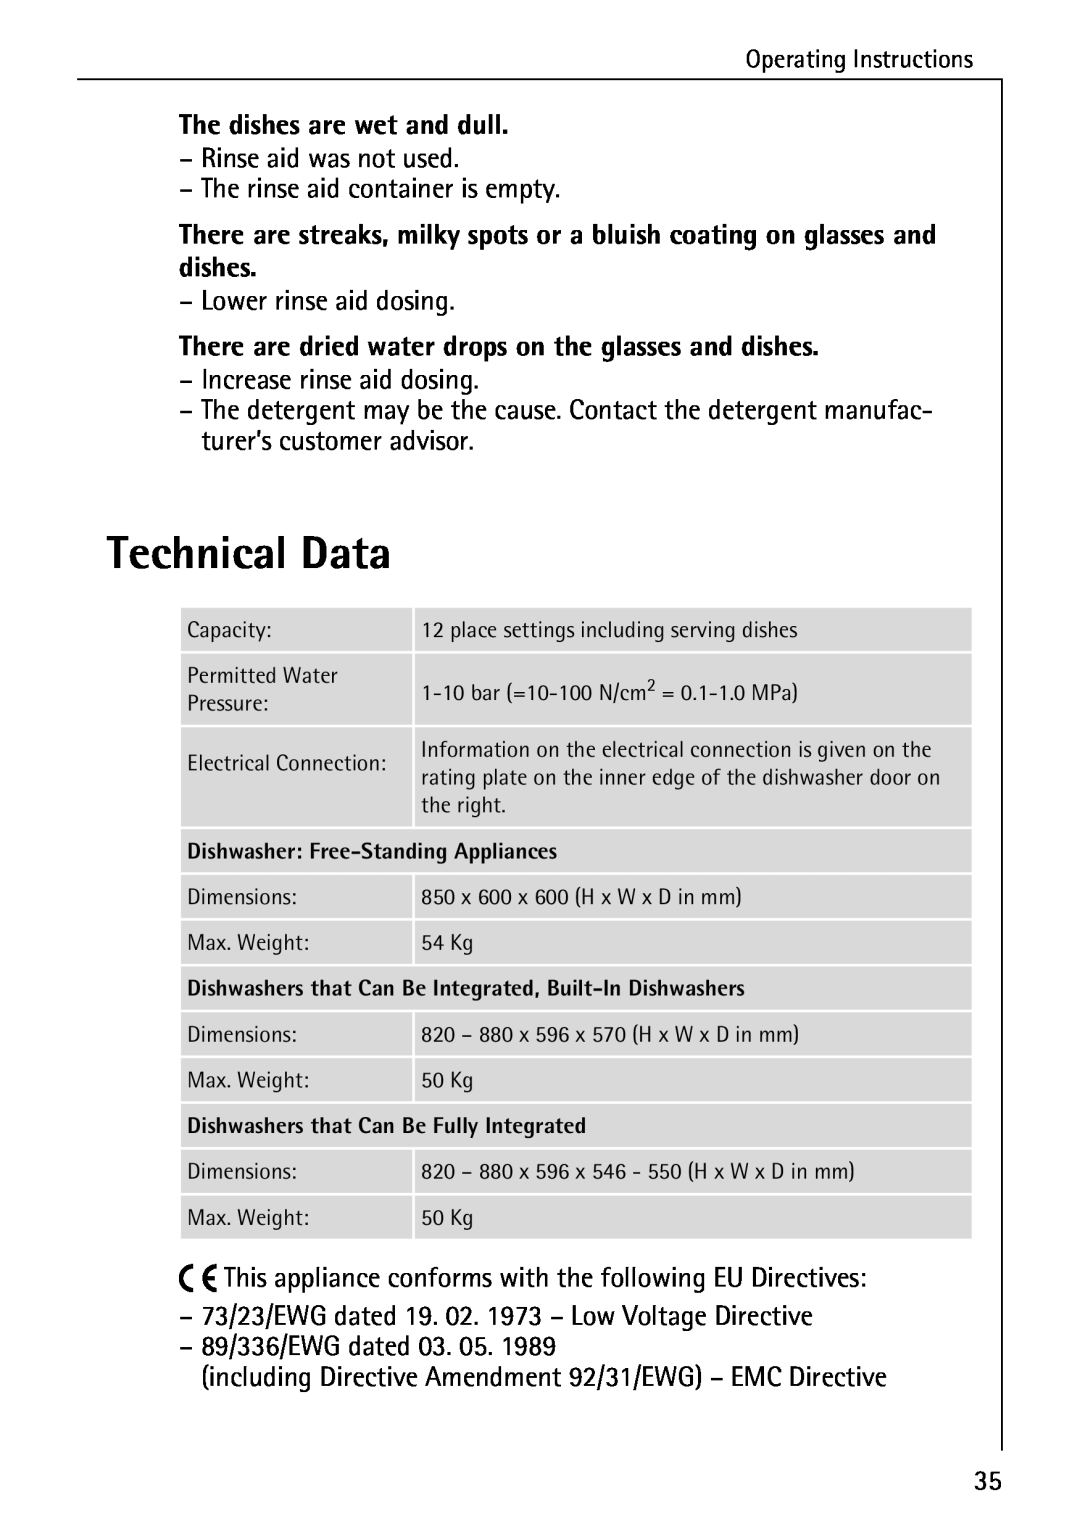 AEG 40740 manual Technical Data, The dishes are wet and dull, There are dried water drops on the glasses and dishes 